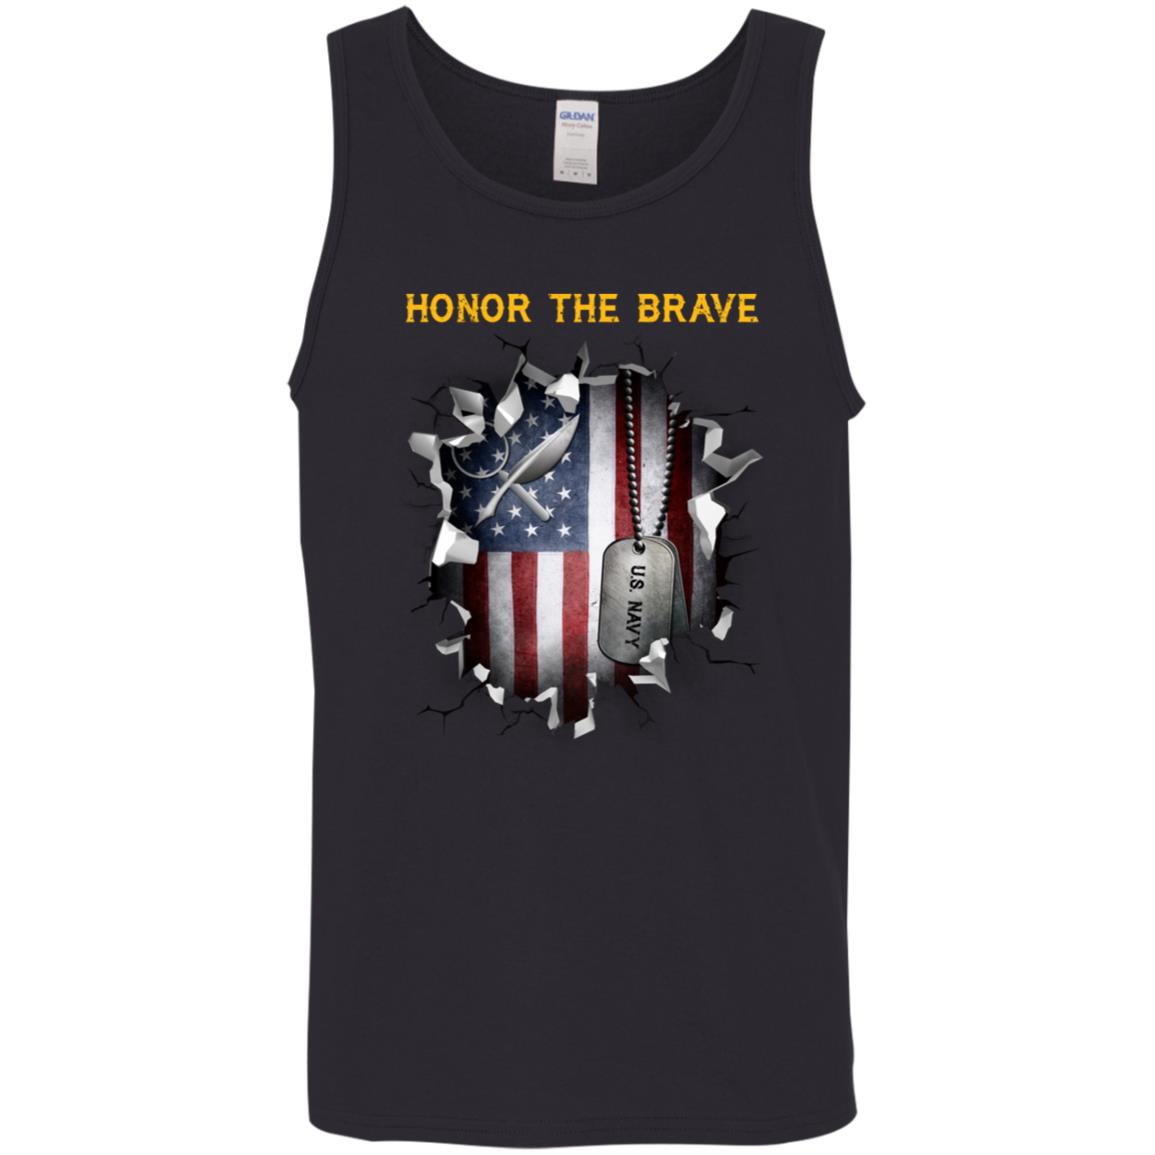 Navy Intelligence Specialist Navy IS - Honor The Brave Front Shirt